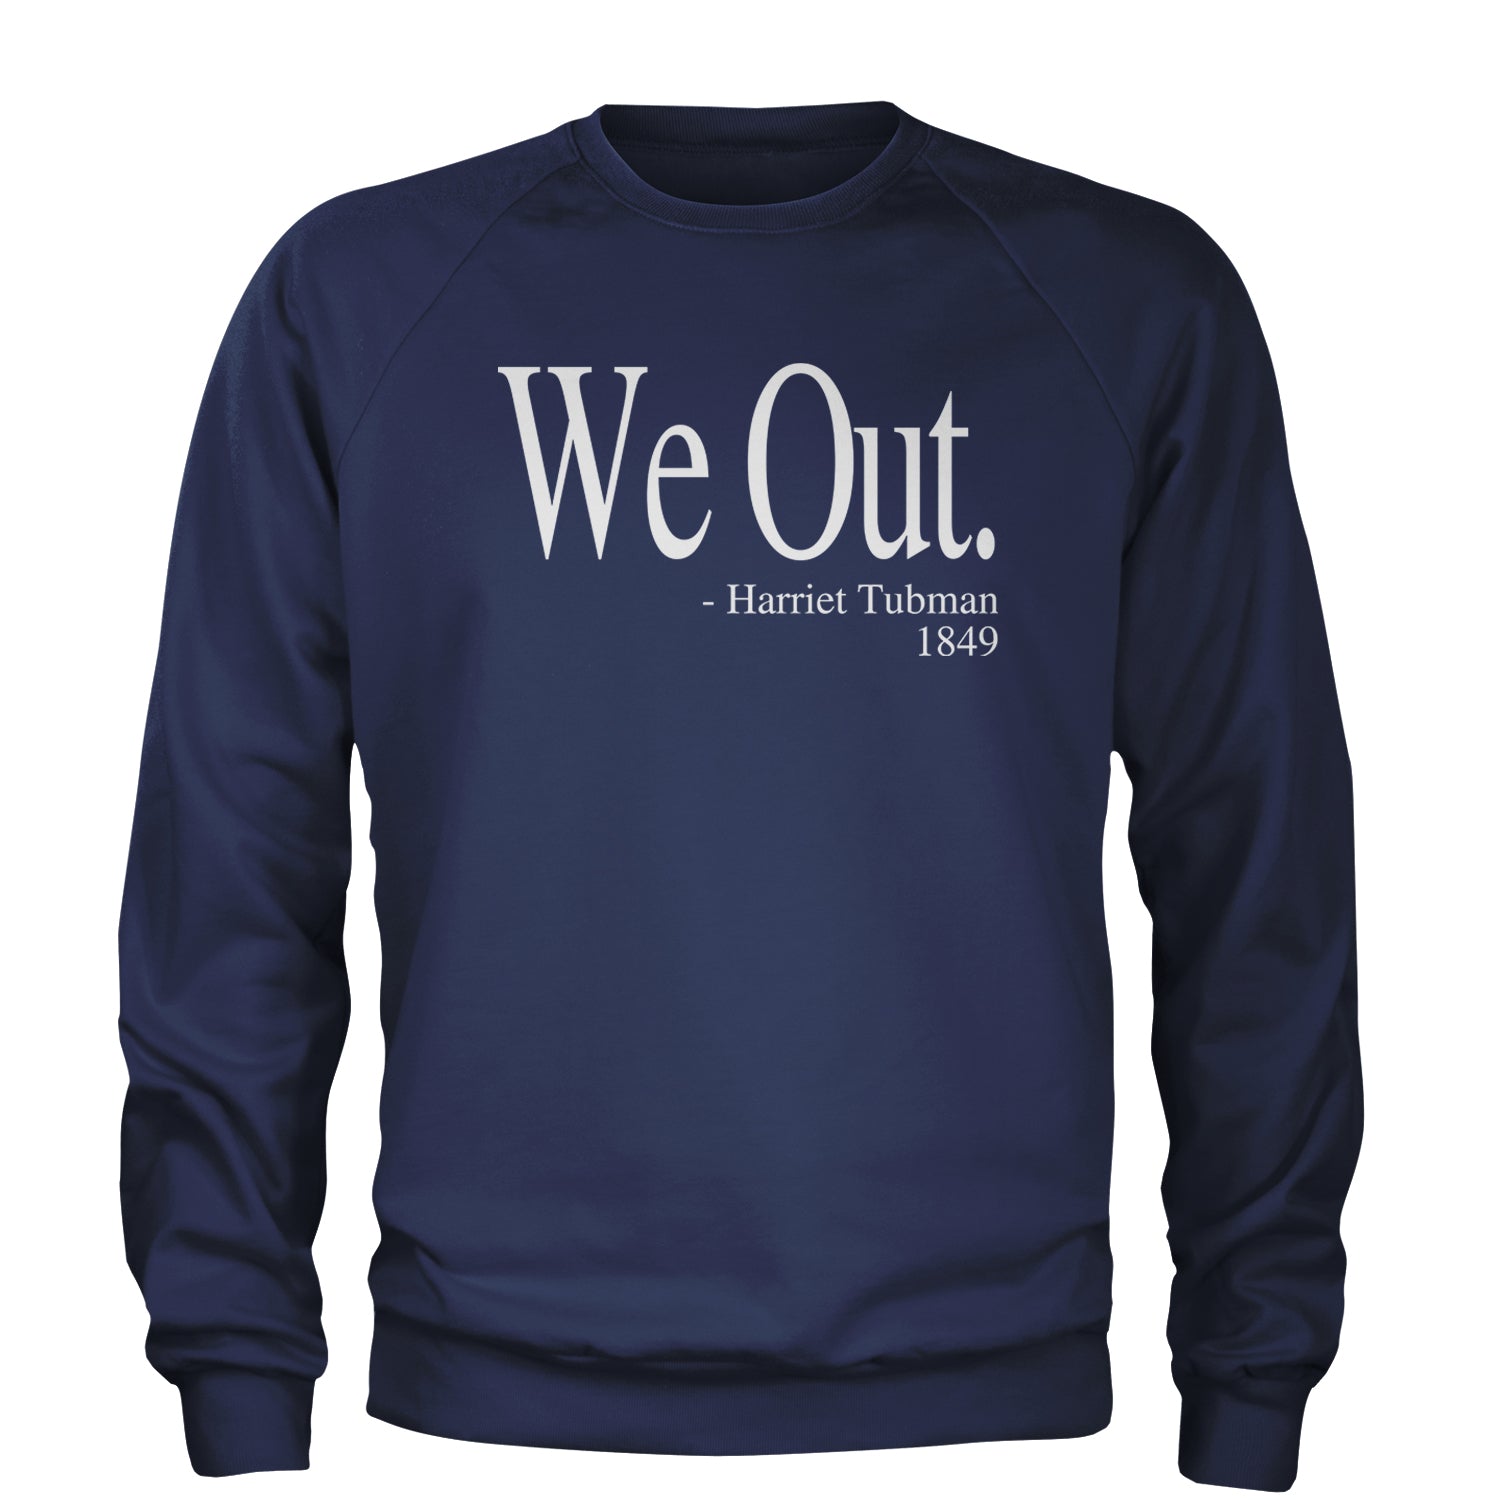 We Out Harriet Tubman Funny Quote Adult Crewneck Sweatshirt